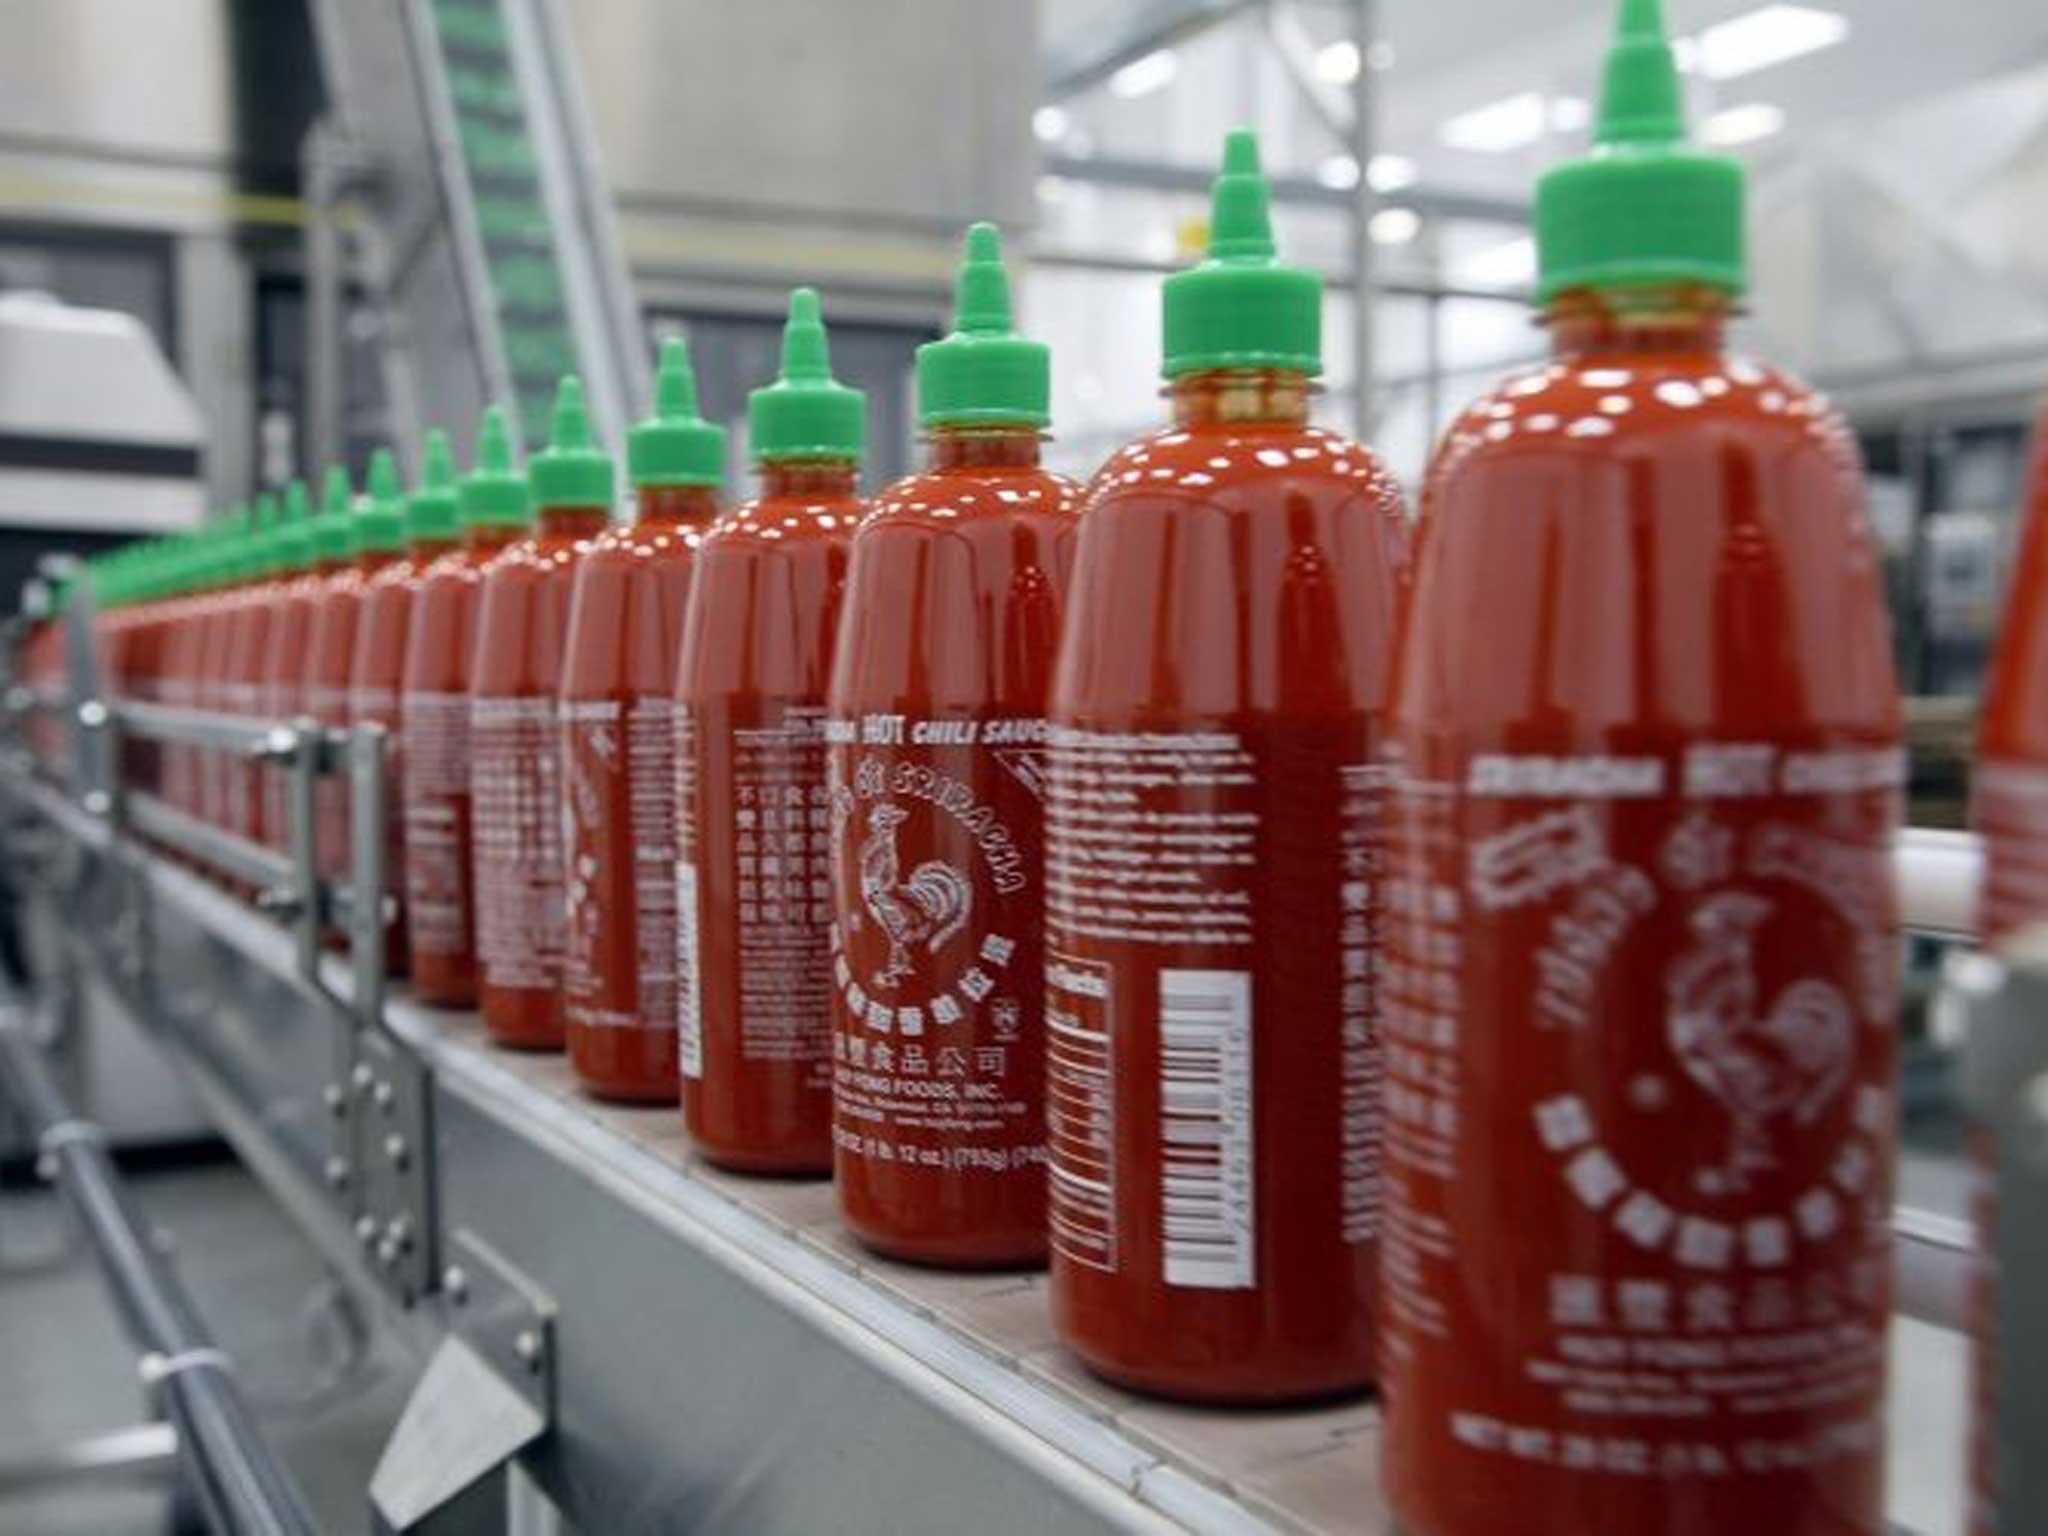 Hot off the press: Sriracha Hot Chilli Sauce at the Huy Fong Foods factory in Irwindale